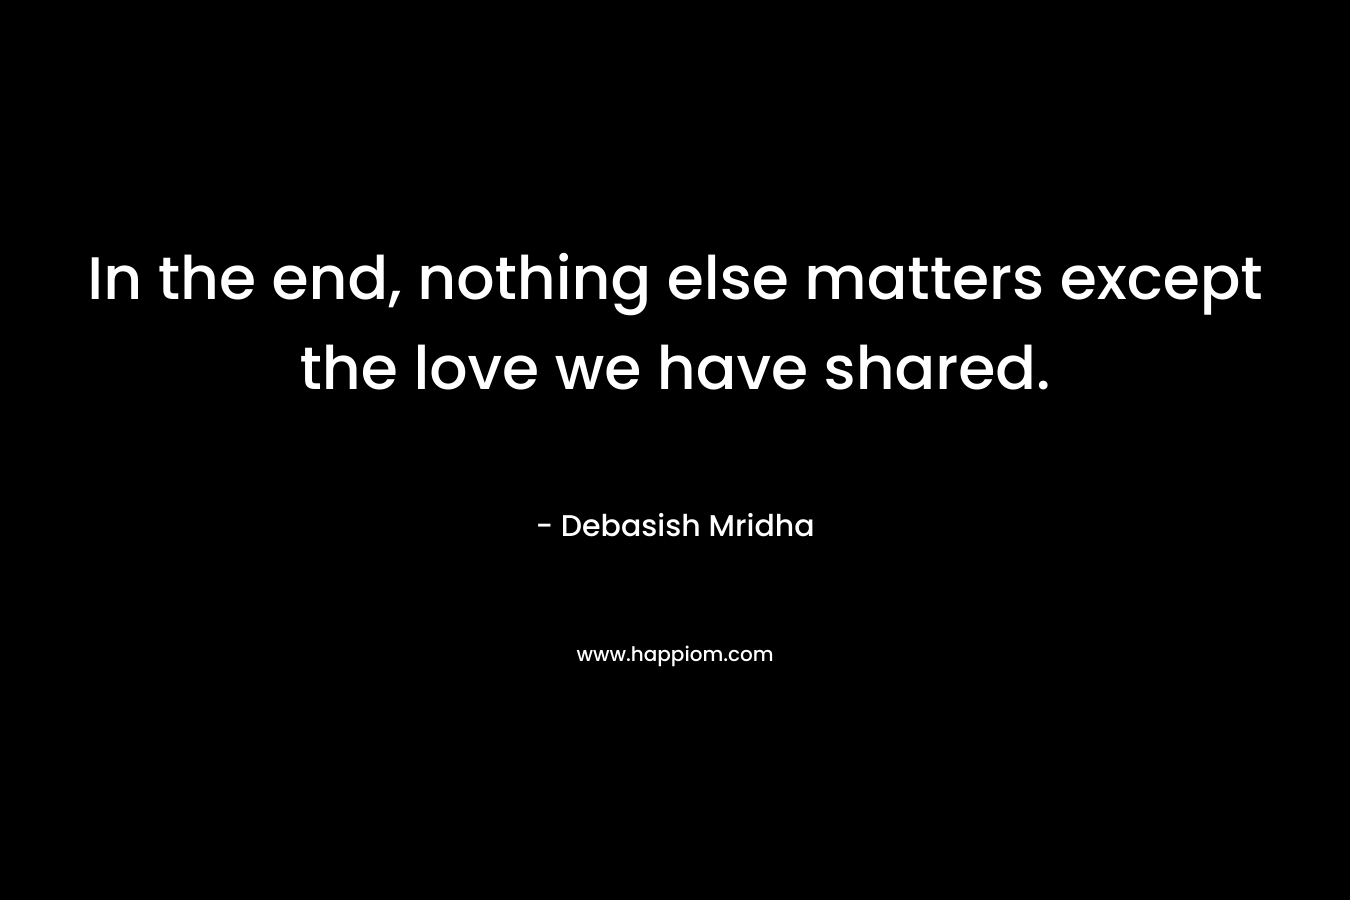 In the end, nothing else matters except the love we have shared.